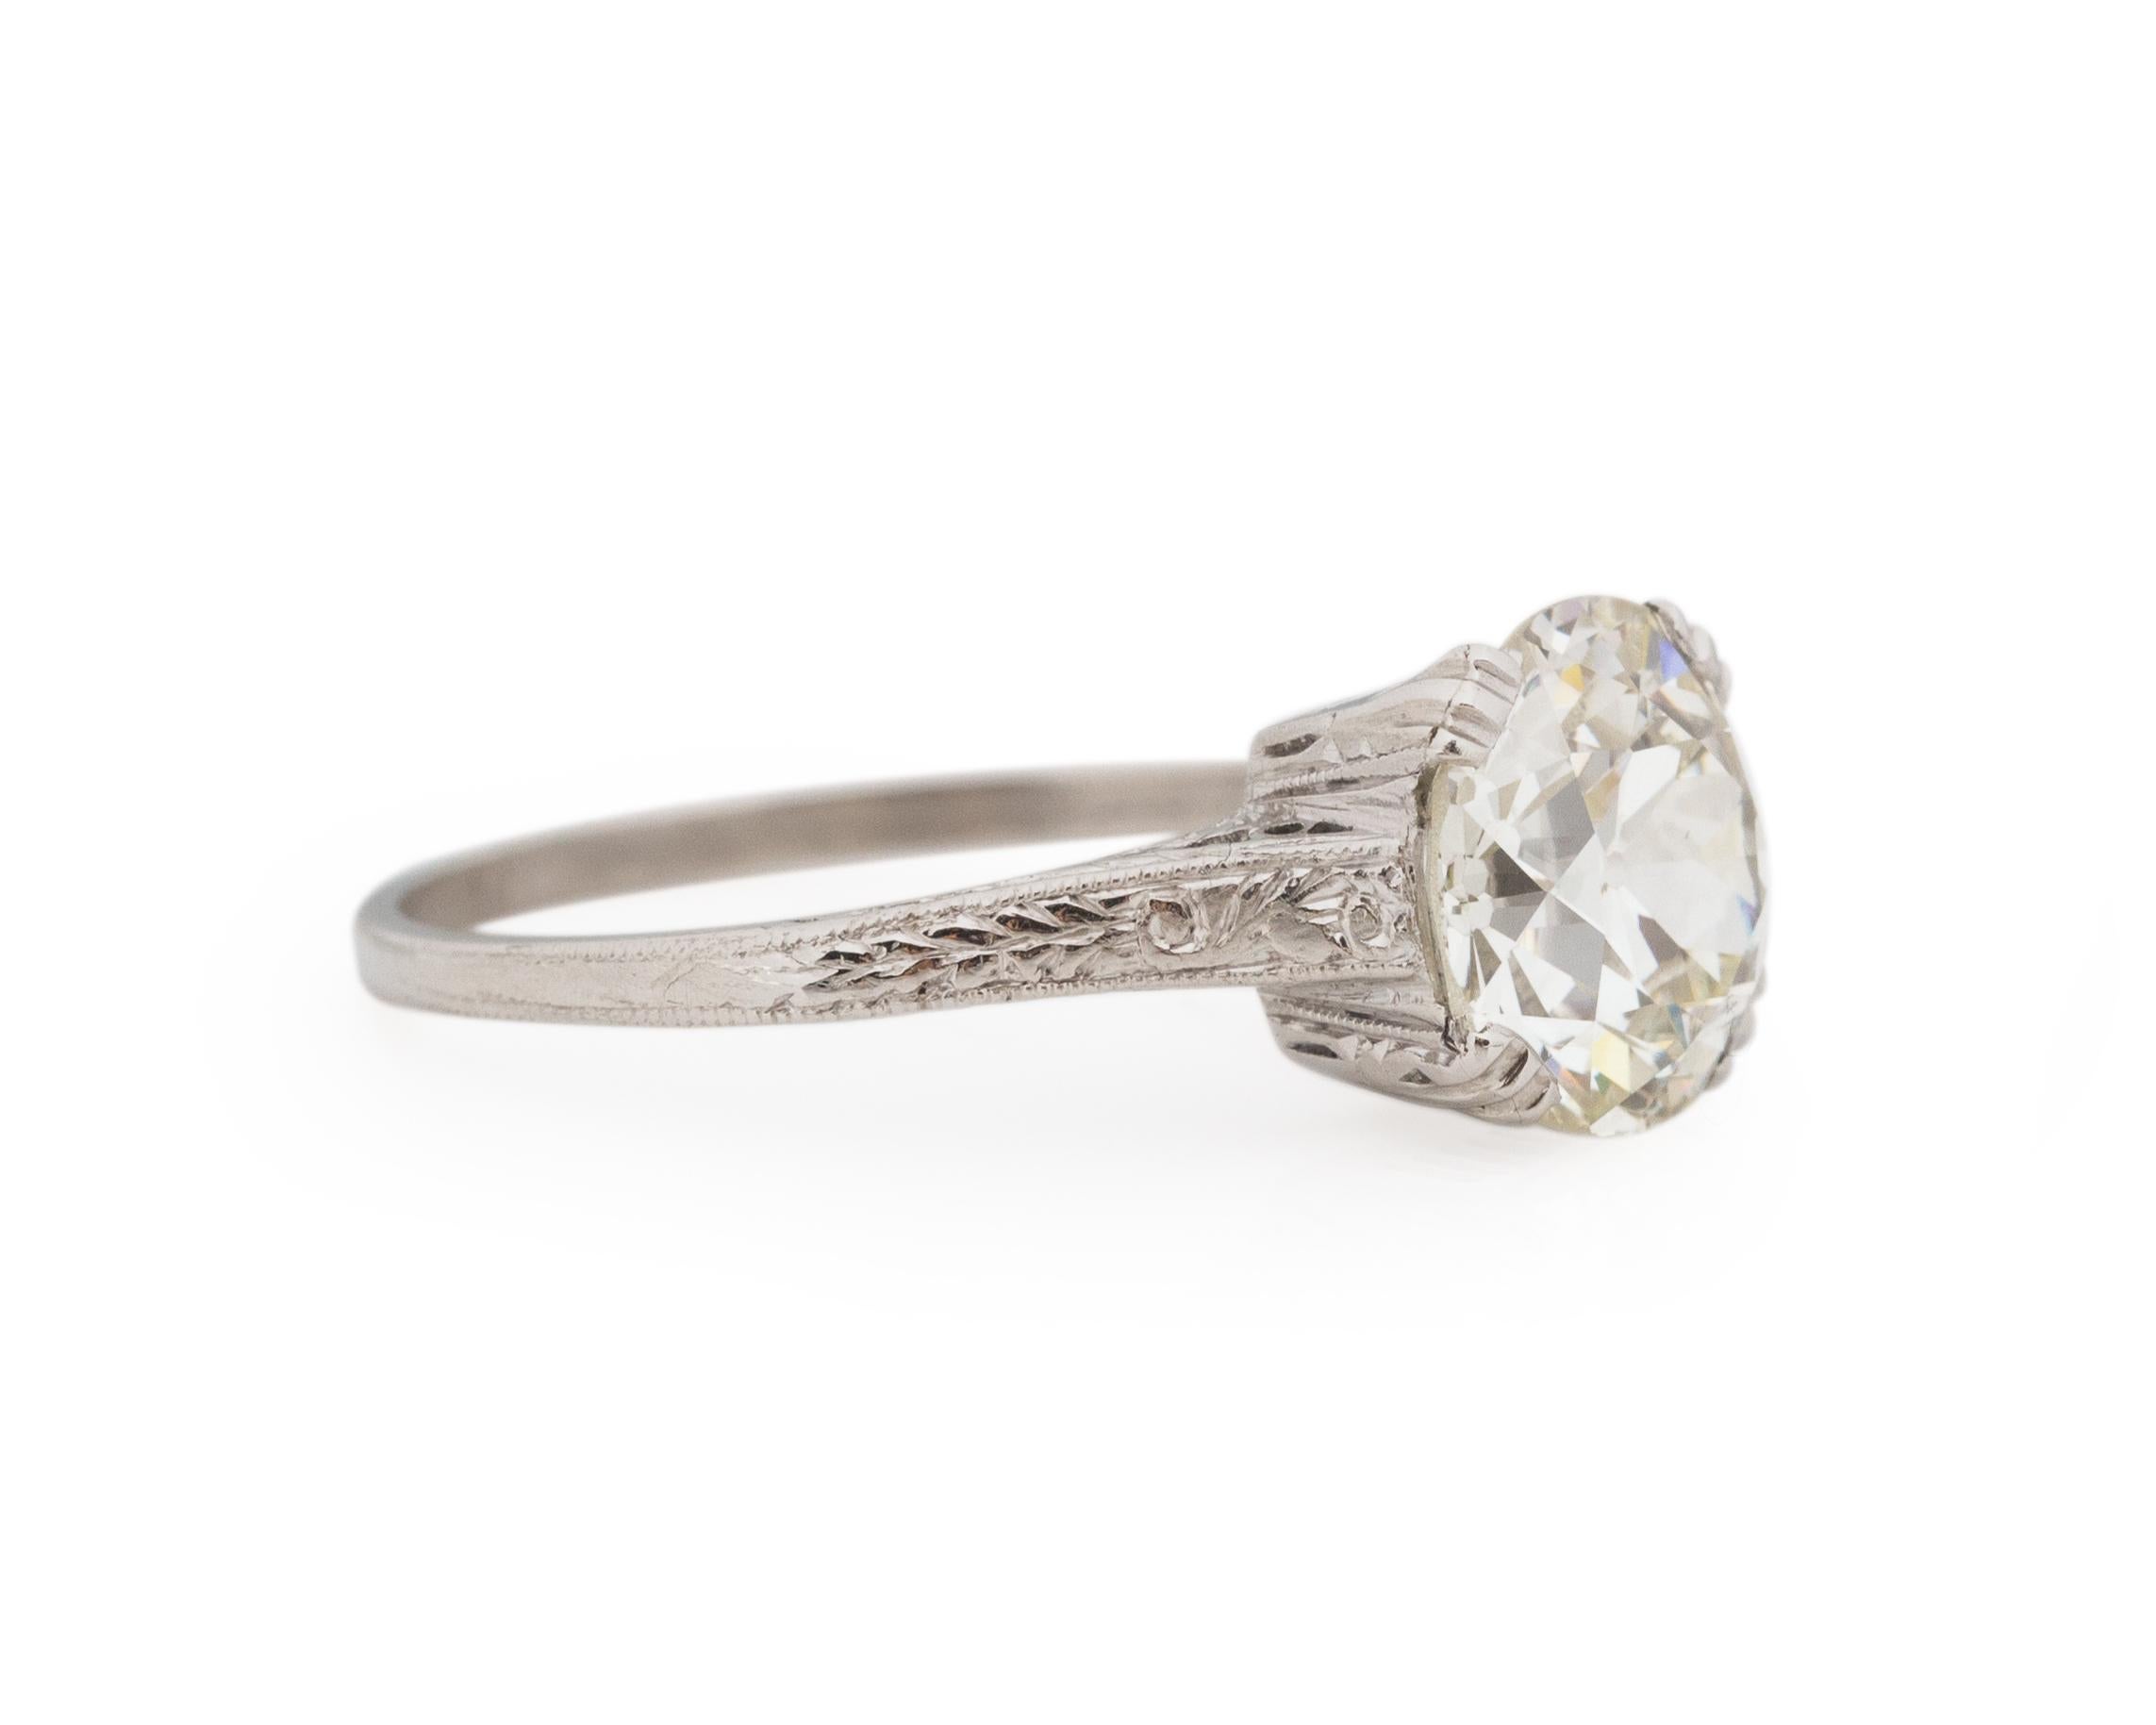 Ring Size: 6.75
Metal Type: Platinum [Hallmarked, and Tested]
Weight: 3.5 grams

Center Diamond Details:
GIA REPORT #: 2225155755
Weight: 2.32ct
Cut: Old European brilliant
Color: L
Clarity: SI1
Measurements: 8.62mm x 8.39mm x 5.00mm

Finger to Top